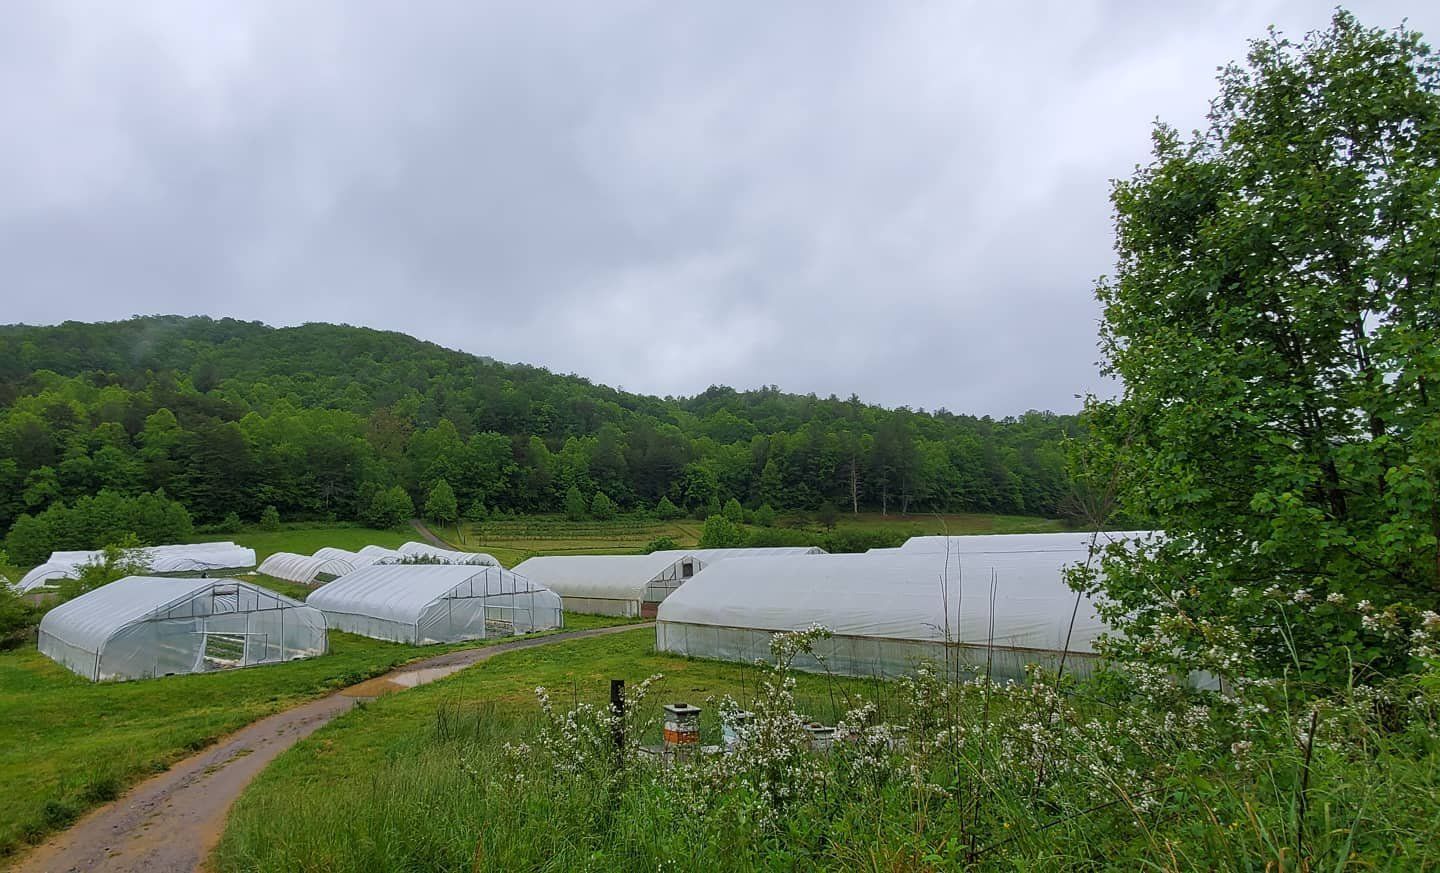 Previous Happening: Farm Happenings for May 26, 2020: lackadaisical worry